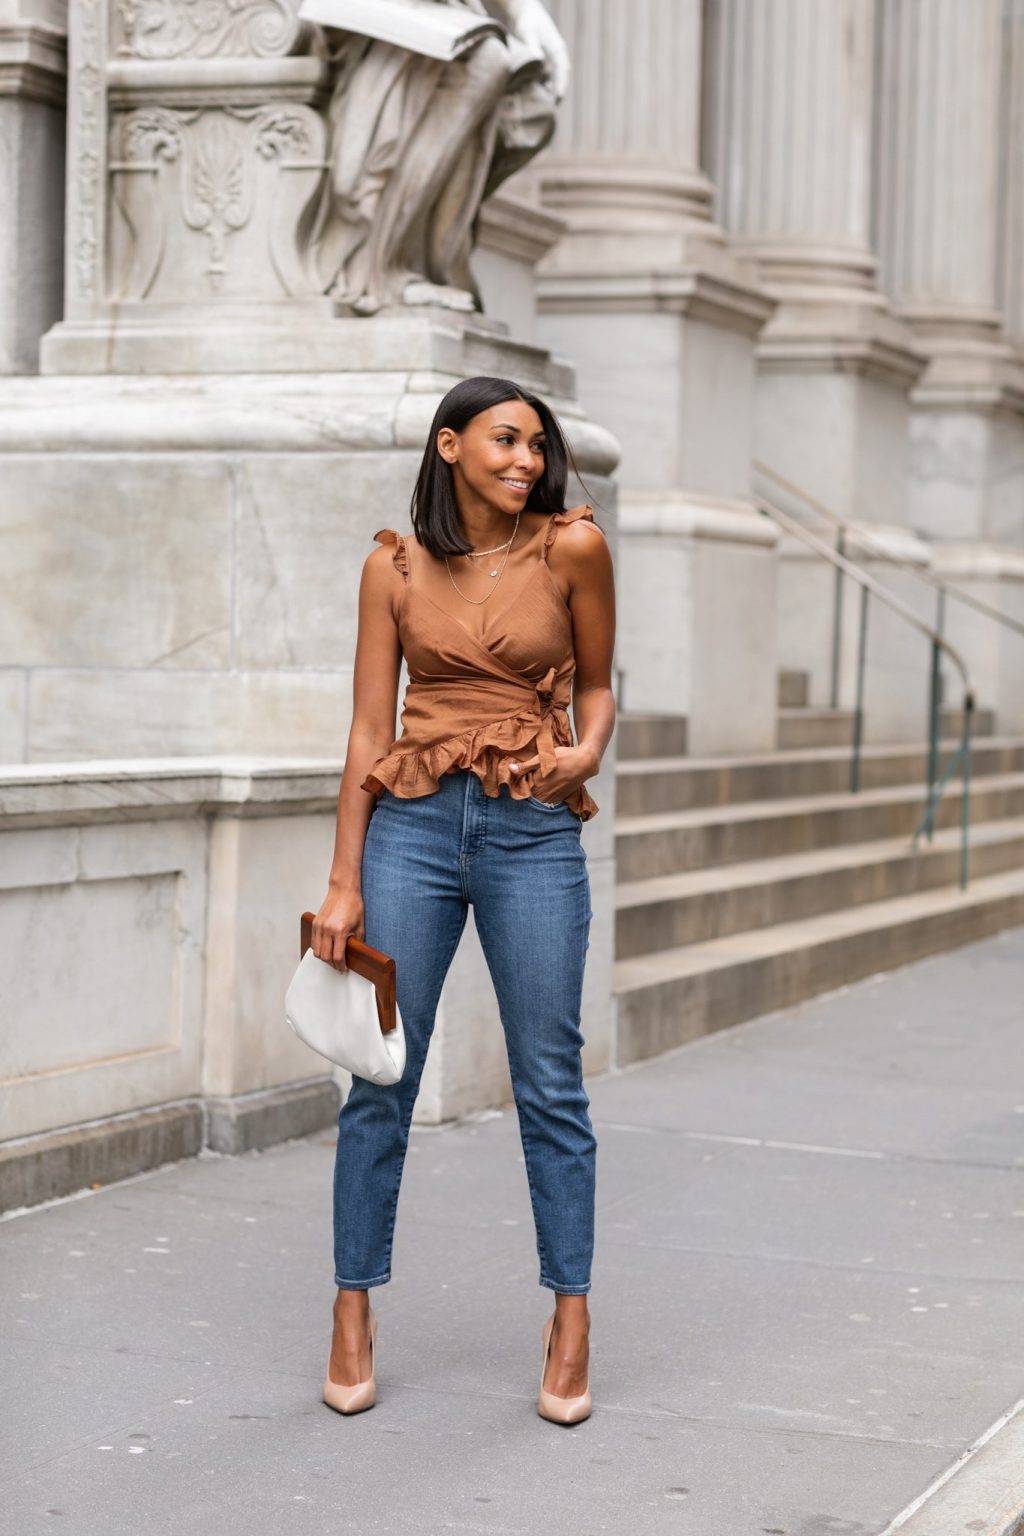 My Favorite Going-Out Tops That Pair Easily With Jeans | Love Fashion ...